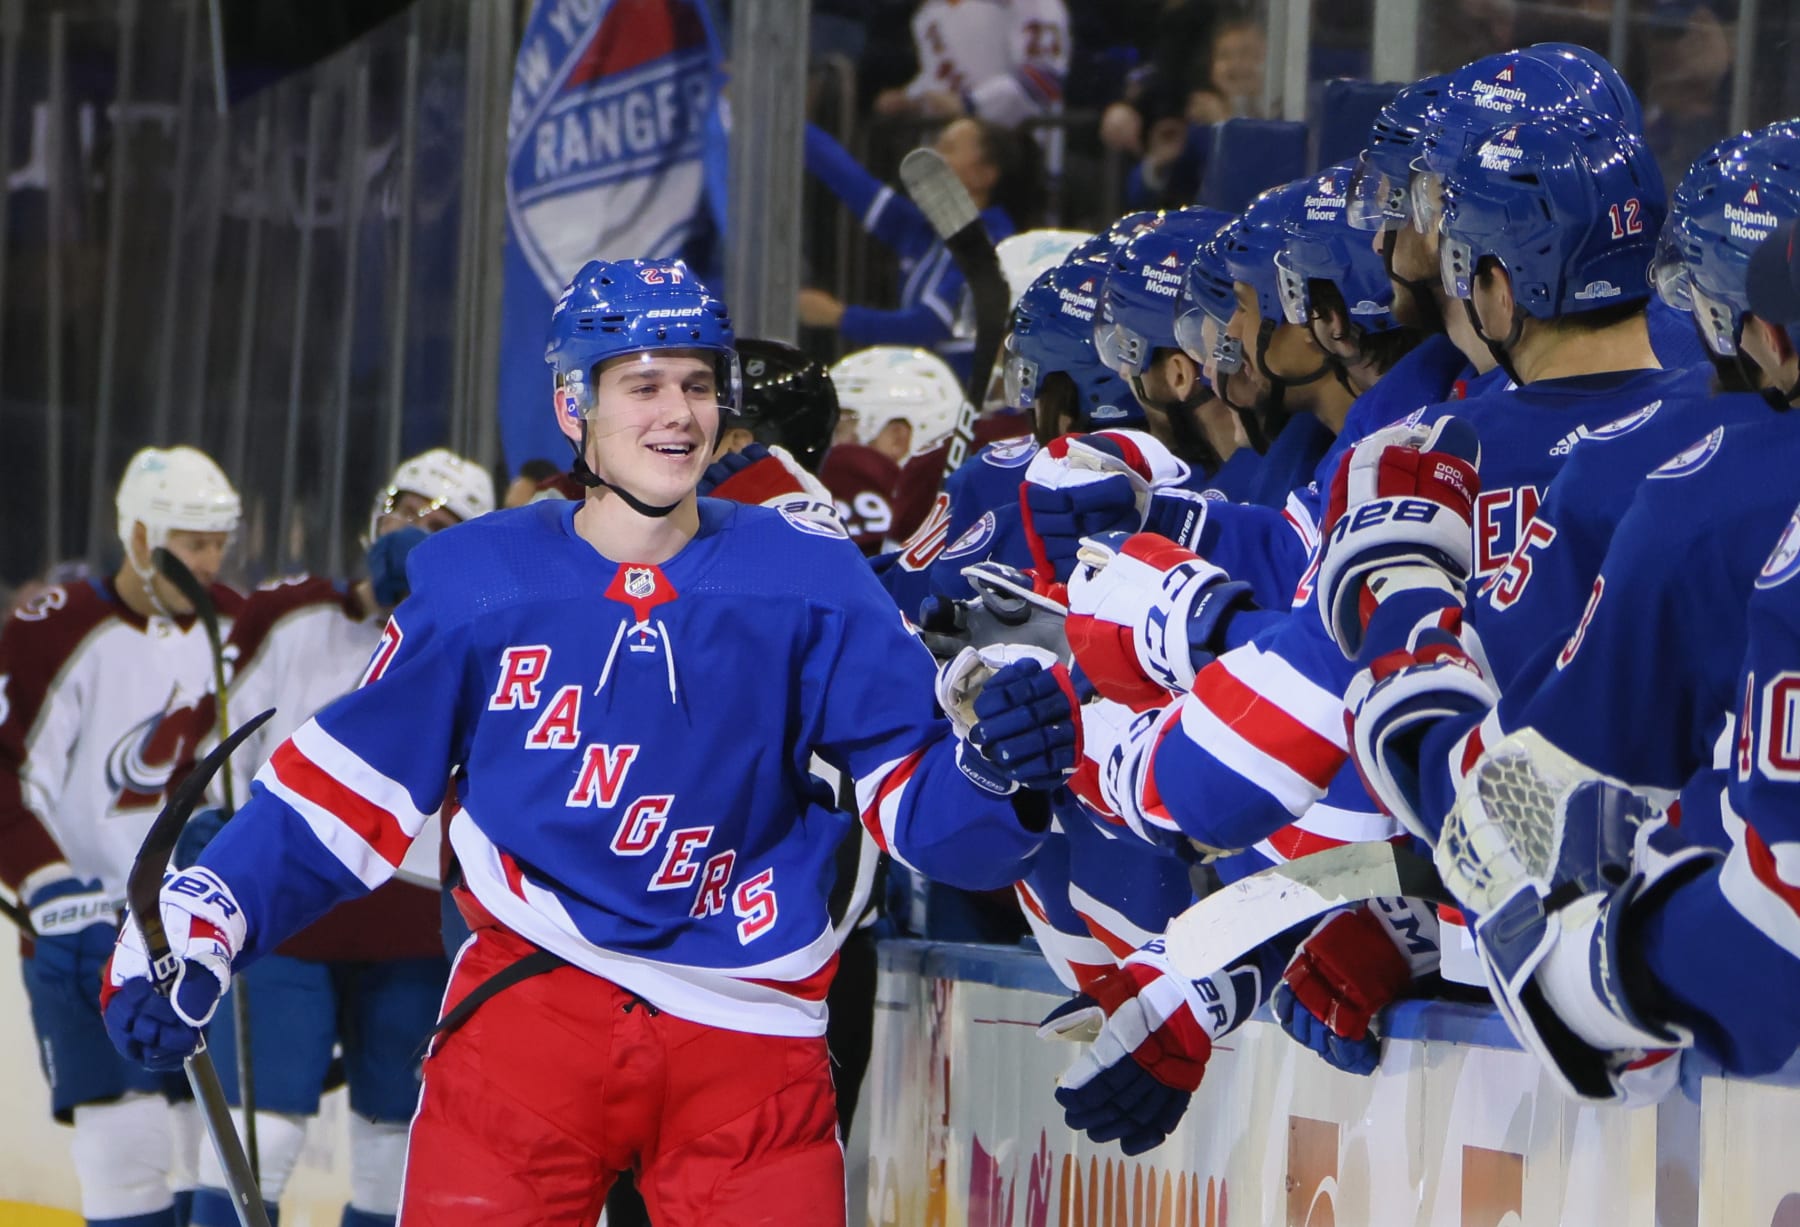 Busy times ahead for Jeff Gorton and the New York Rangers